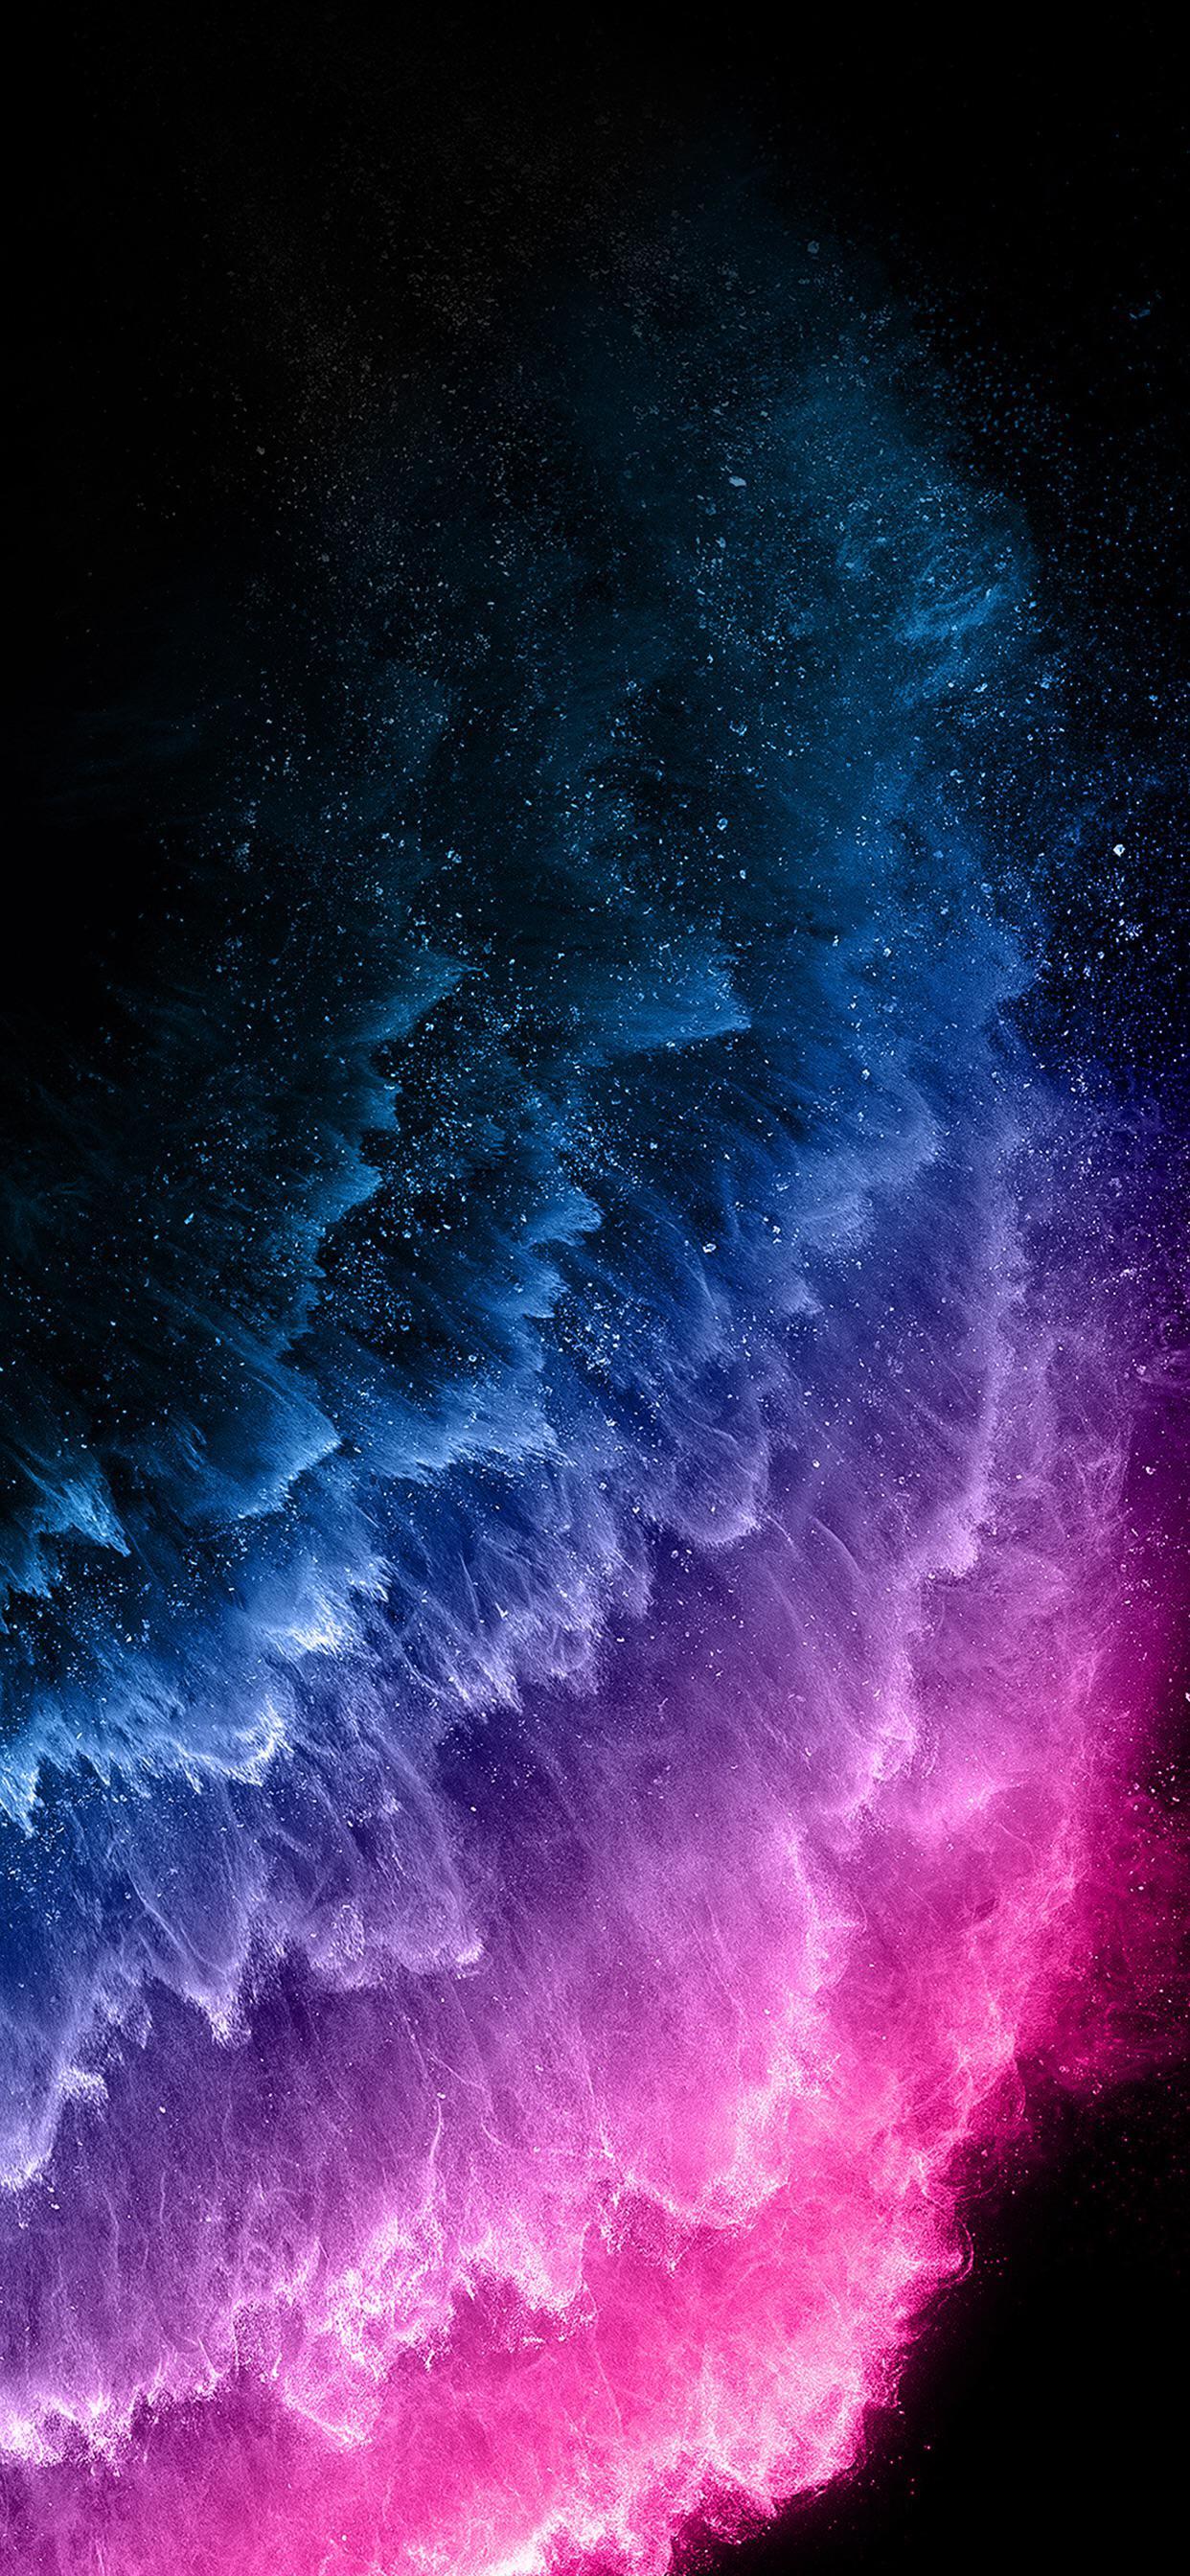 Modded iPhone 11 Pro Wallpapers : iphonexwallpapers